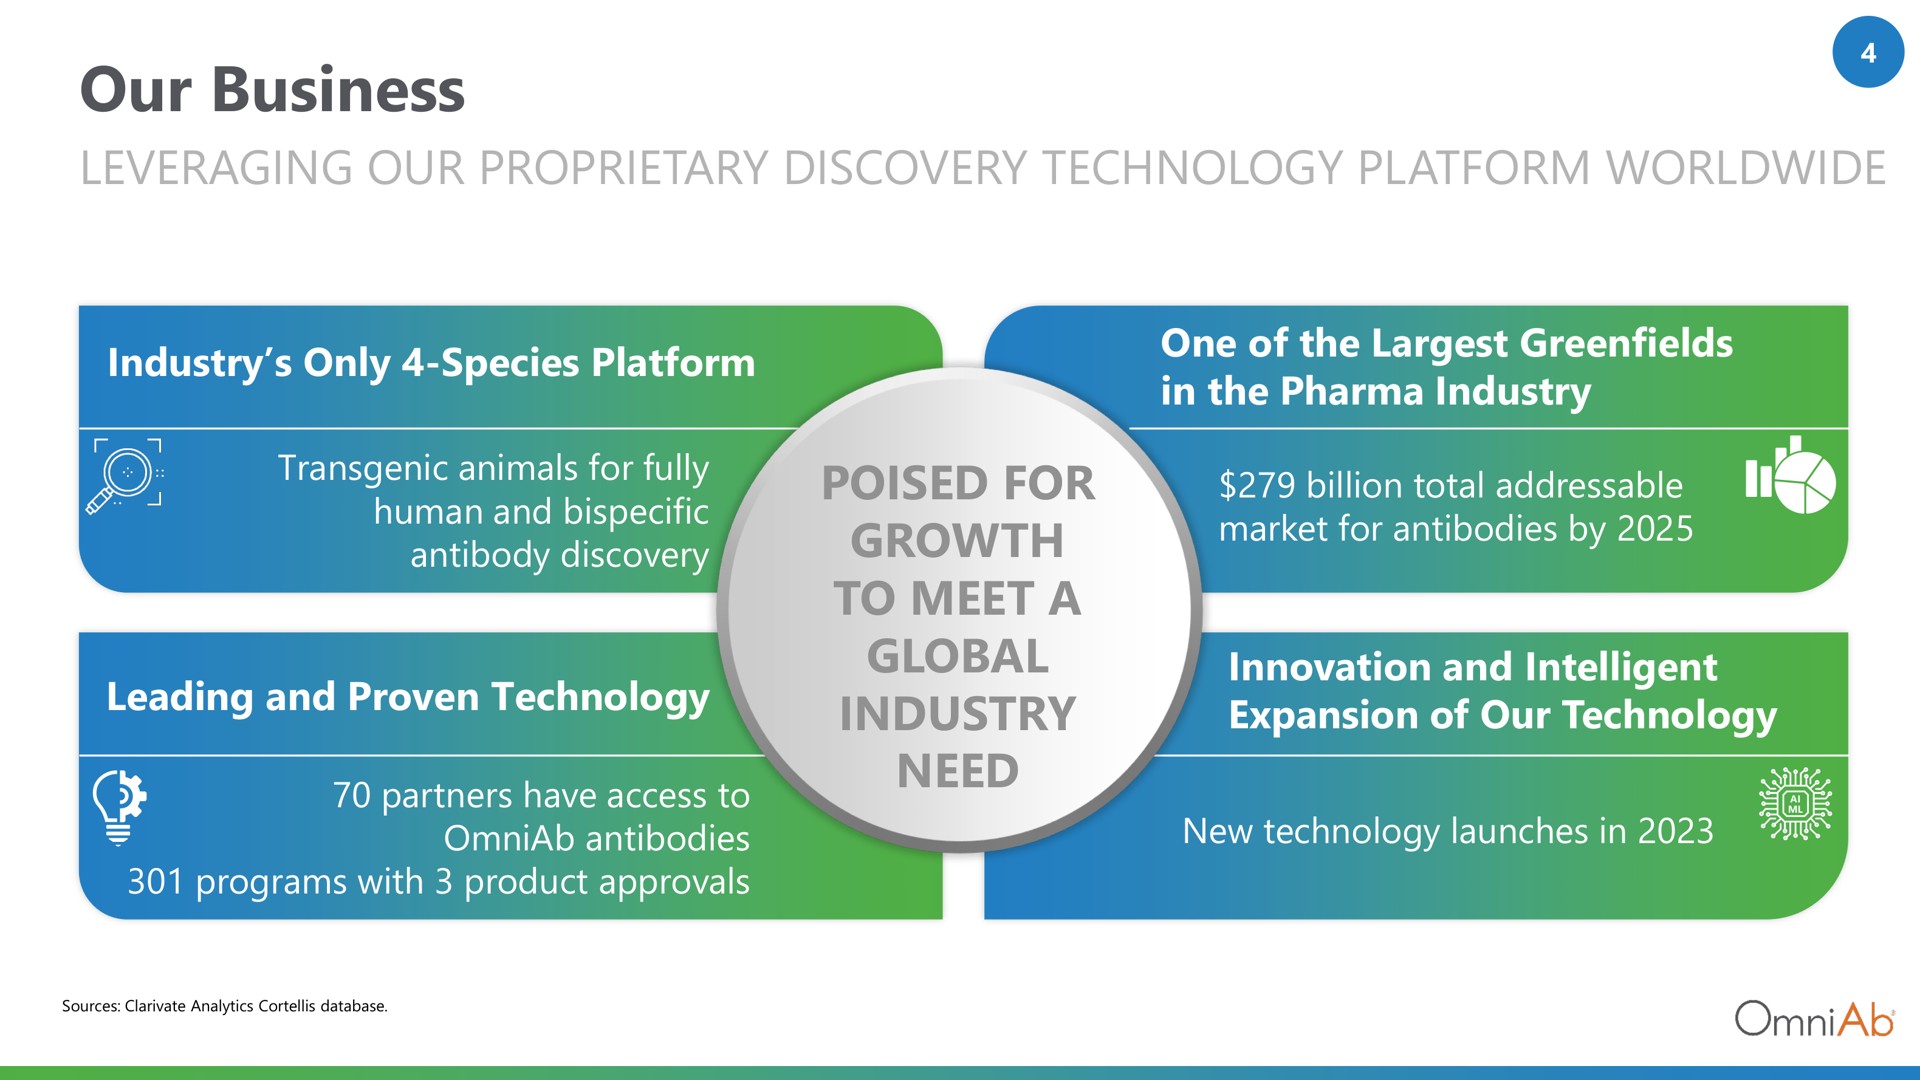 our business leveraging our proprietary discovery technology platform poised for growth to meet a global industry need of billion total rea i | OmniAb